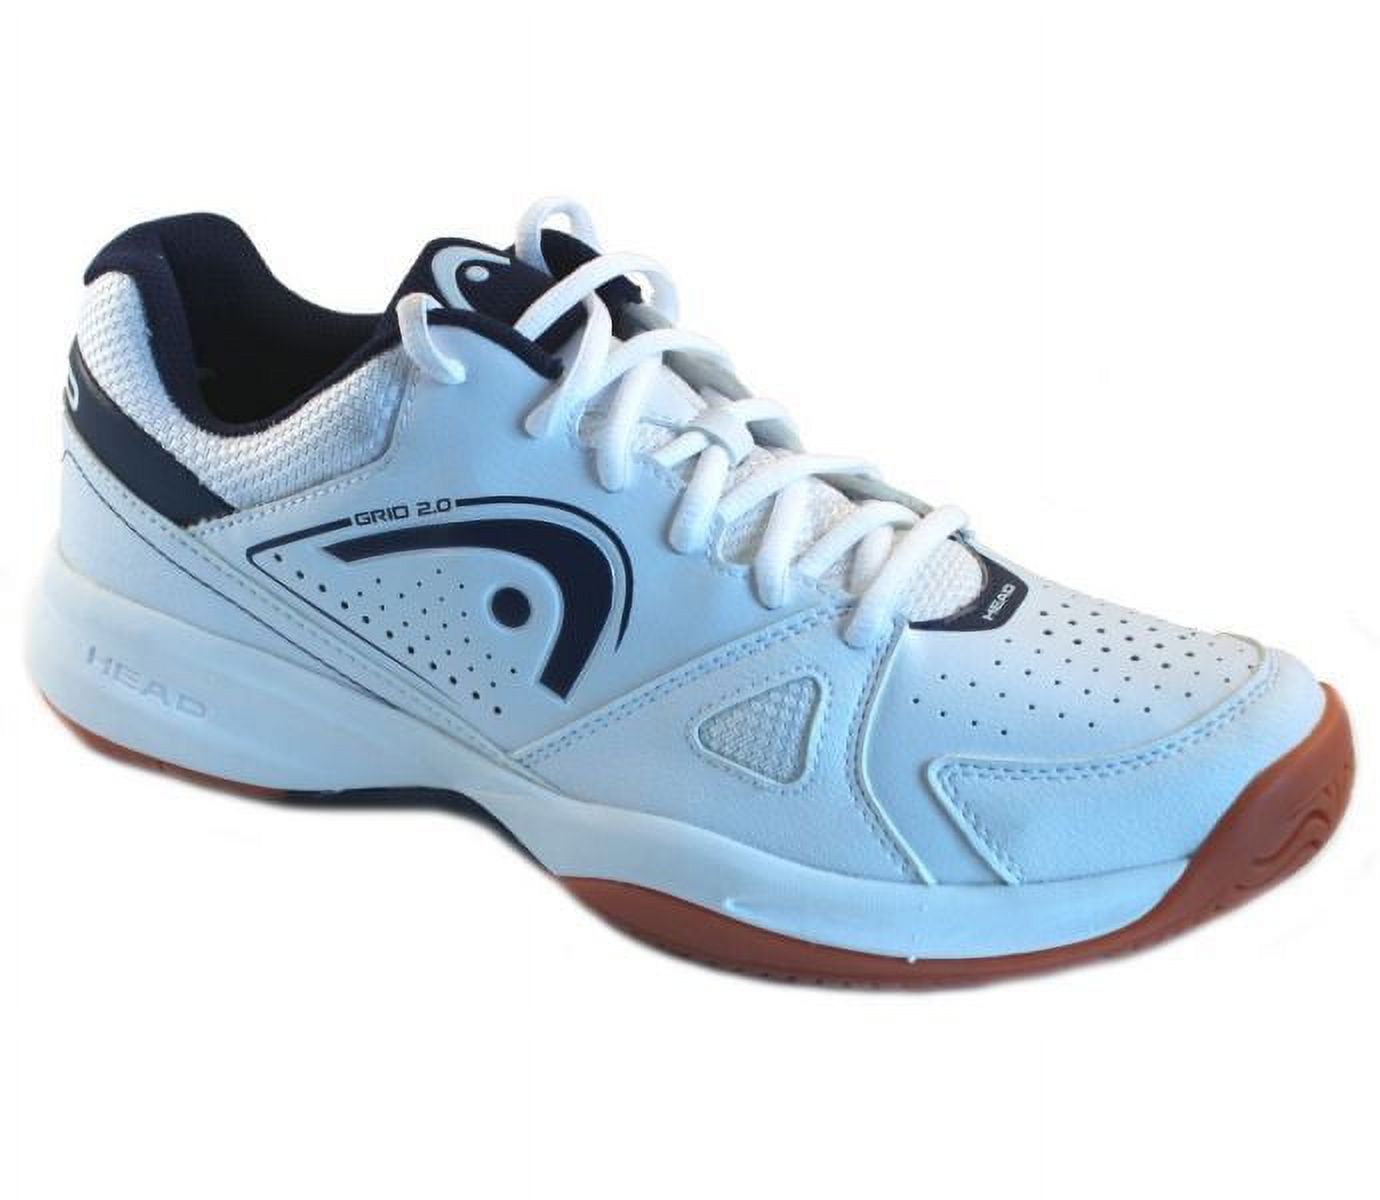 HEAD Men's Grid 2.0 Low Racquetball/Squash Indoor Court Shoes (Non-Marking) (White/Navy) 9.5 (D) US - image 1 of 7